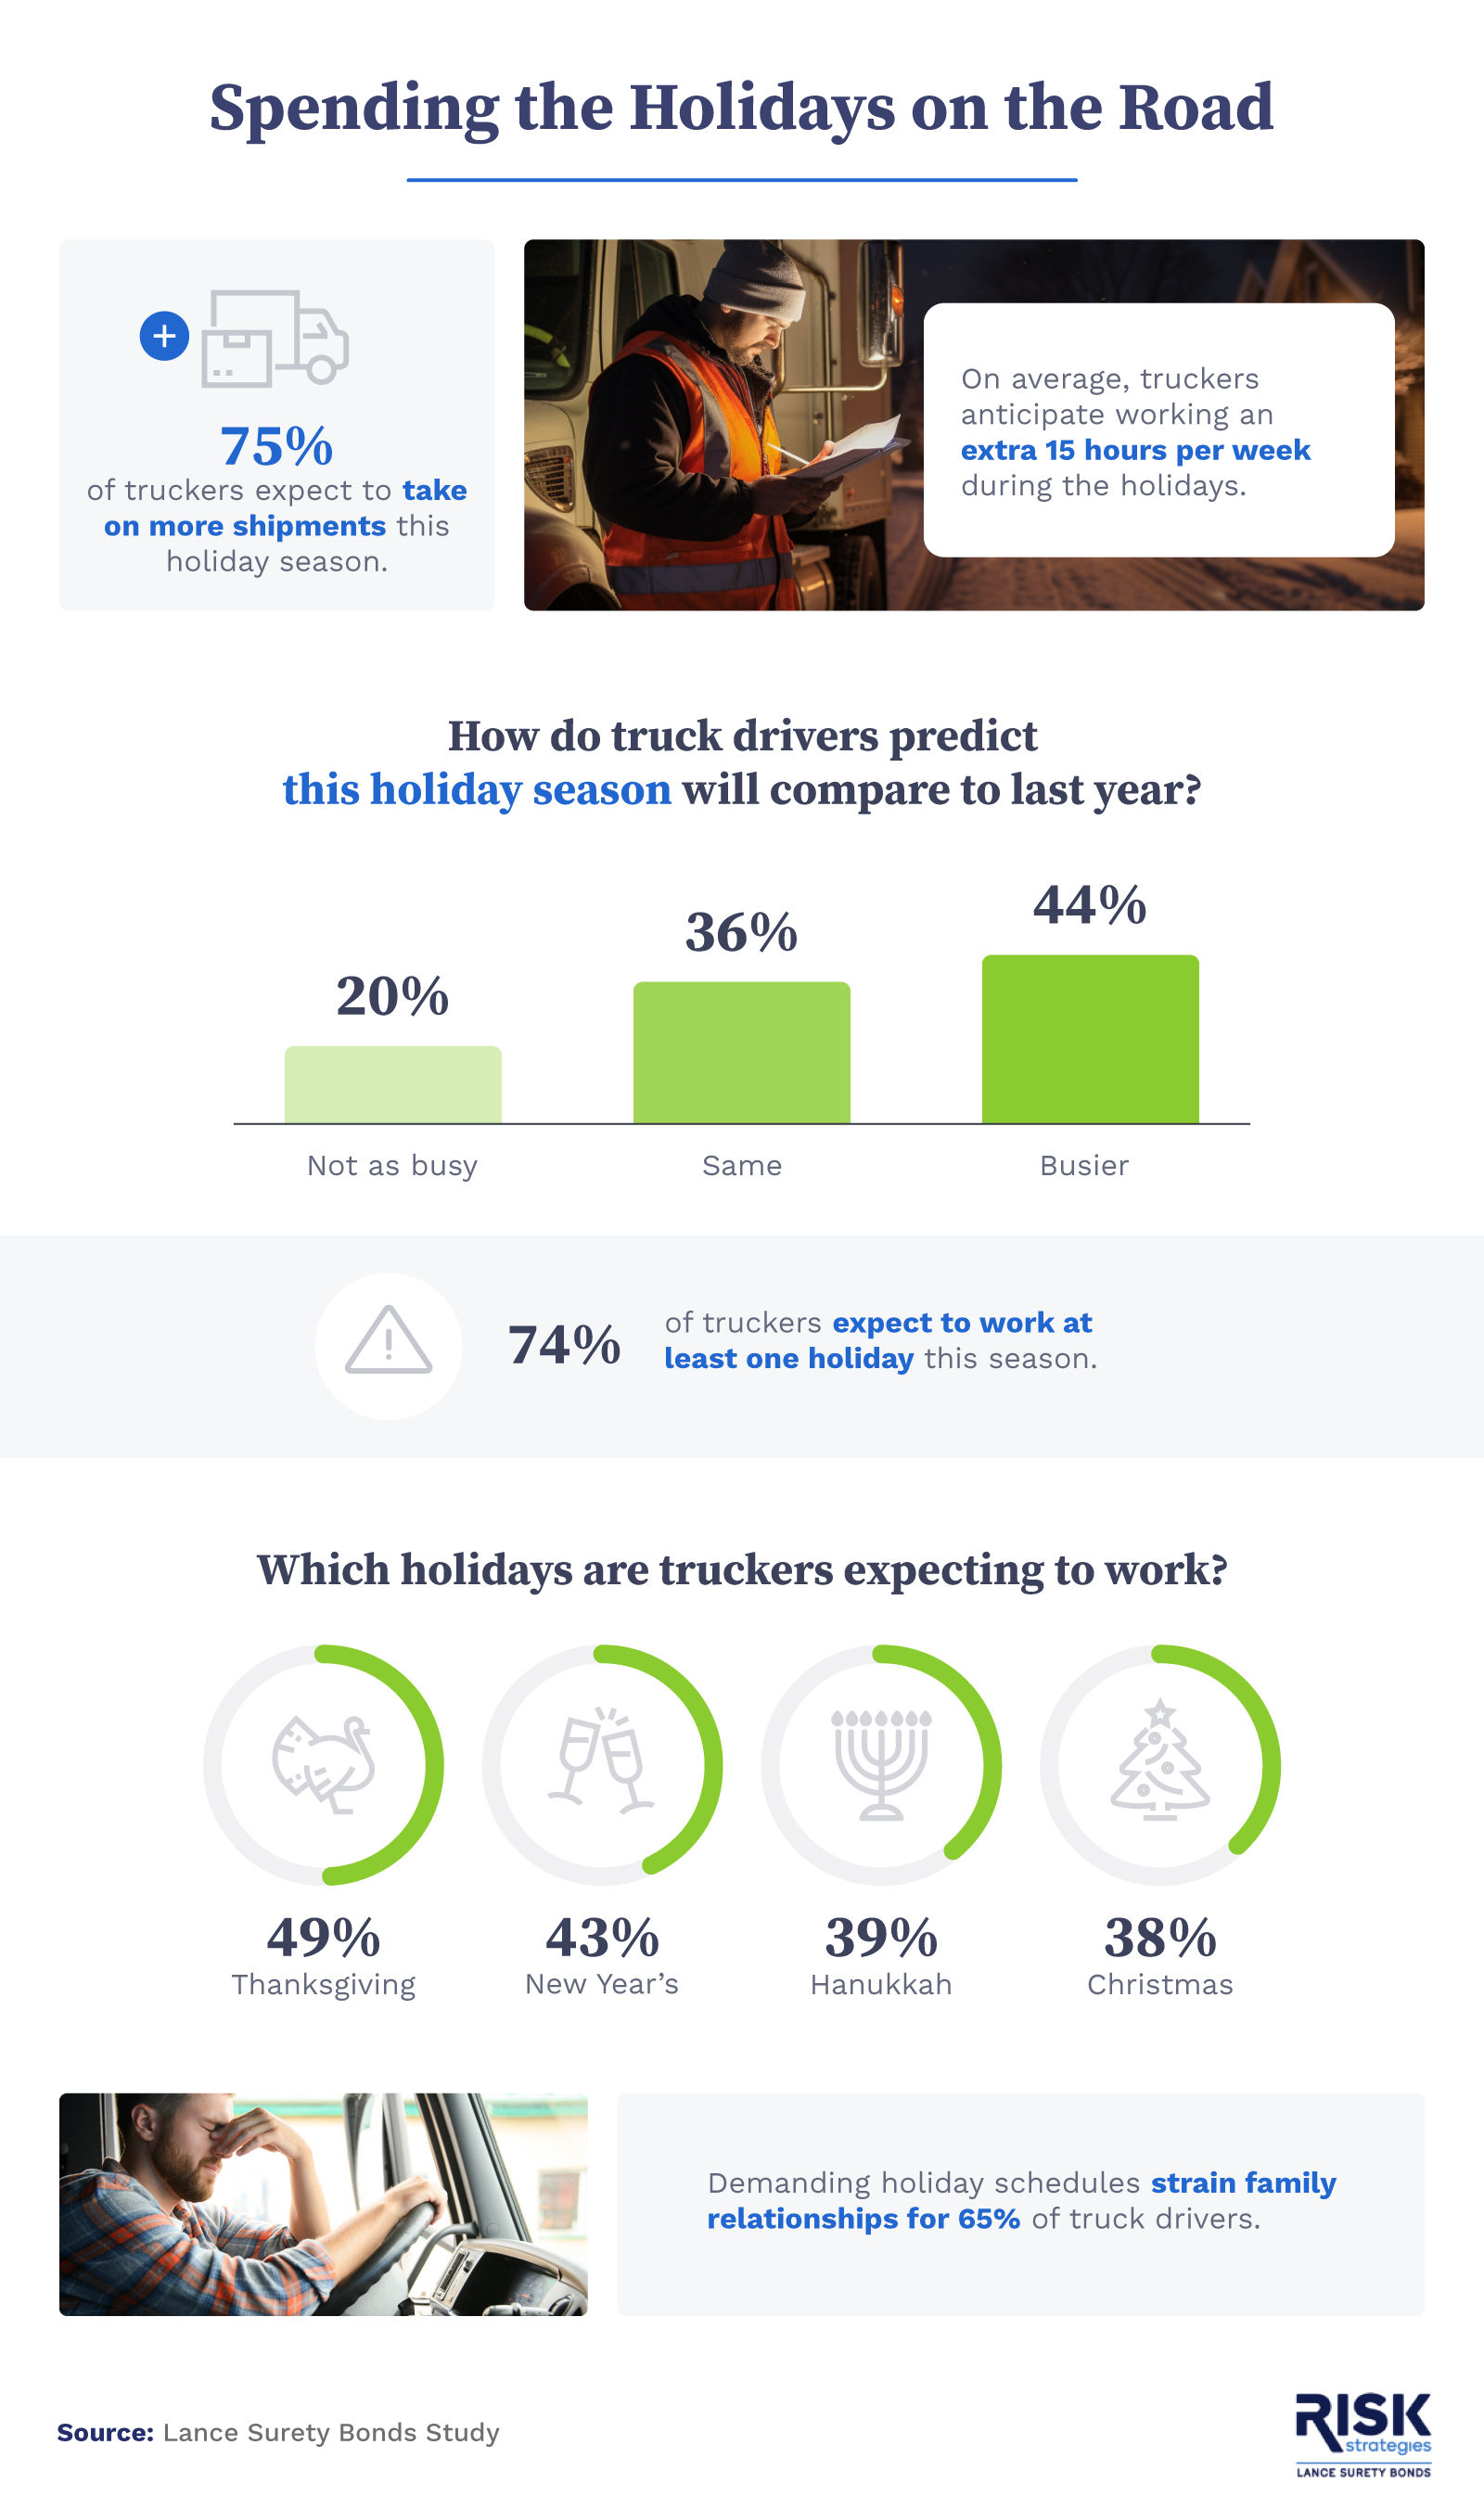 Infographic that explores how truck drivers perceive the upcoming holiday season to go